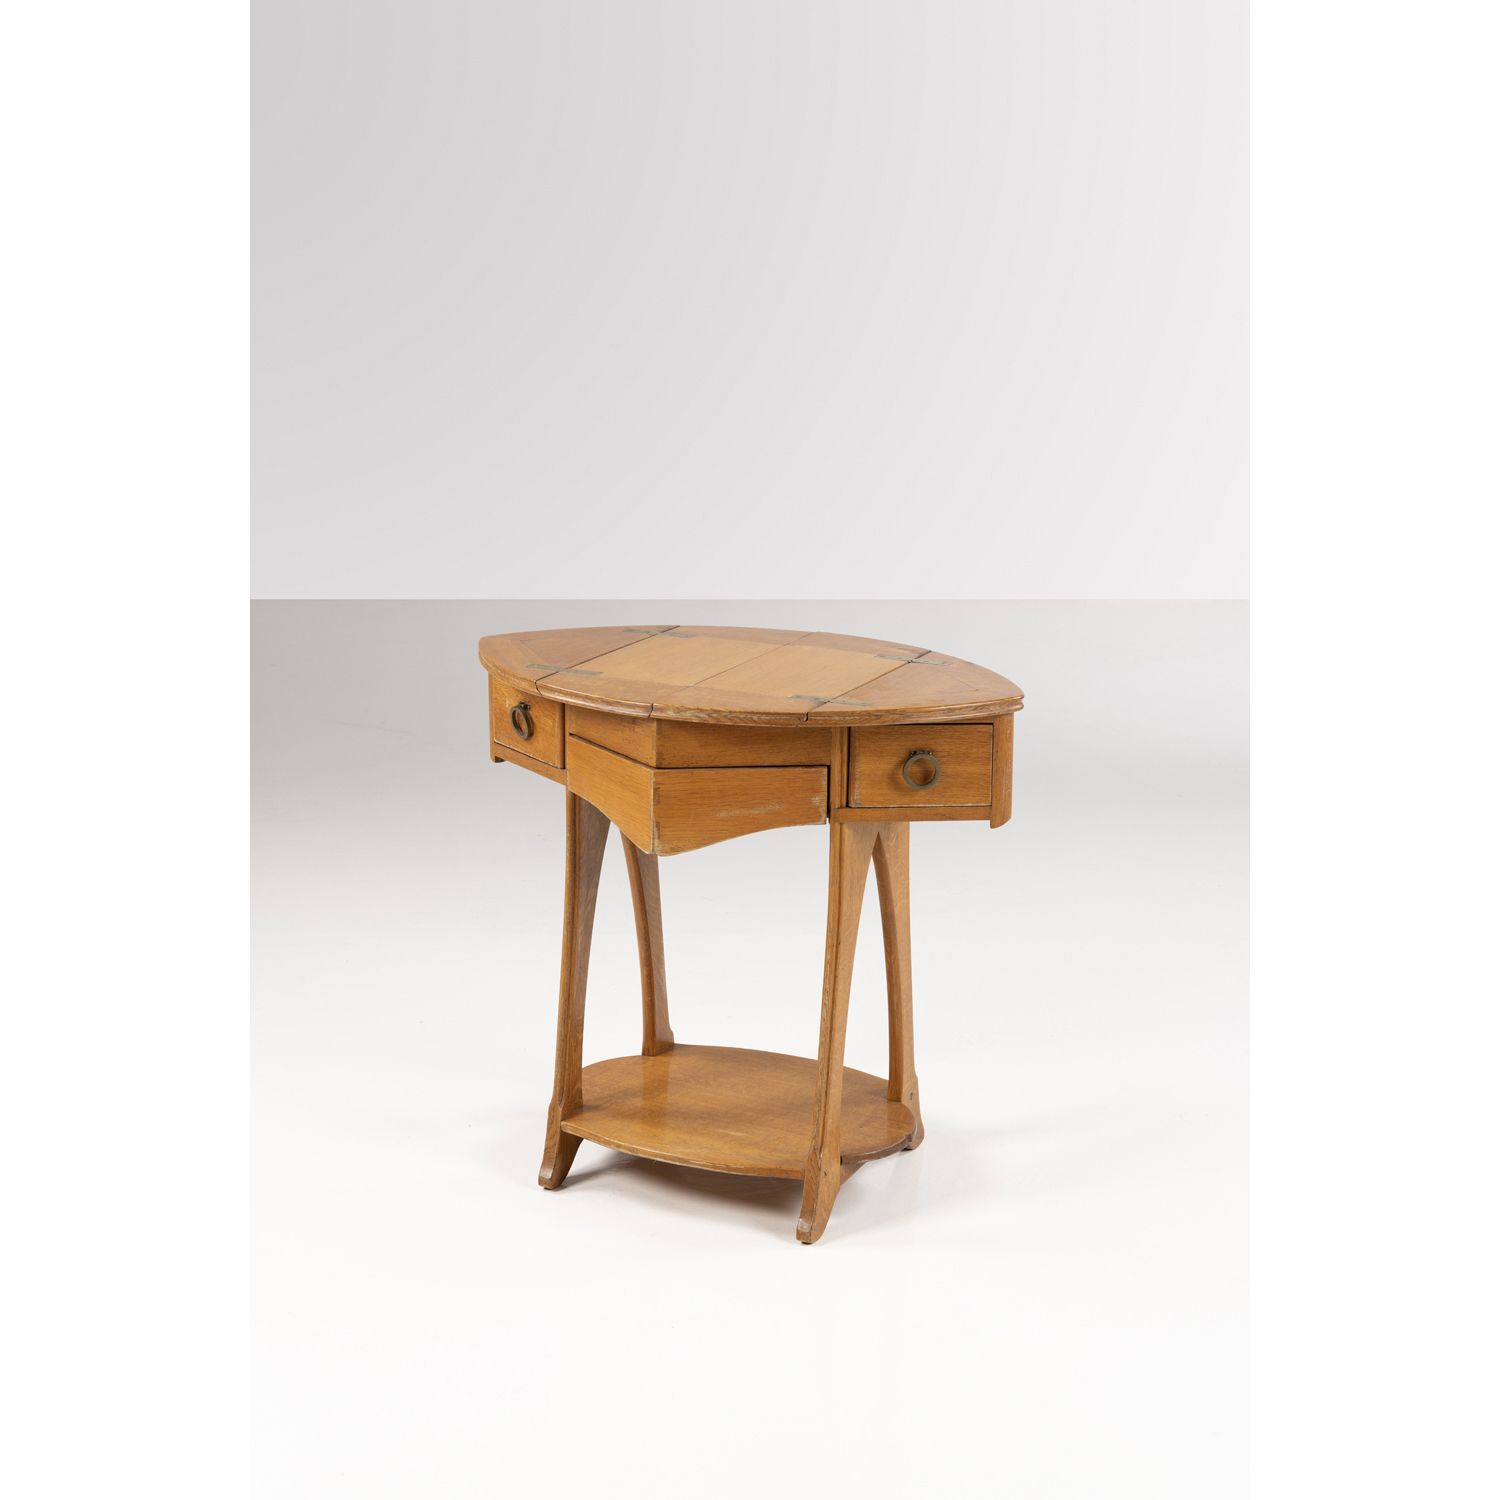 Null Travail Arts and Crafts (XIXe-XXe)

Table travailleuse, vers 1900

Bois et &hellip;